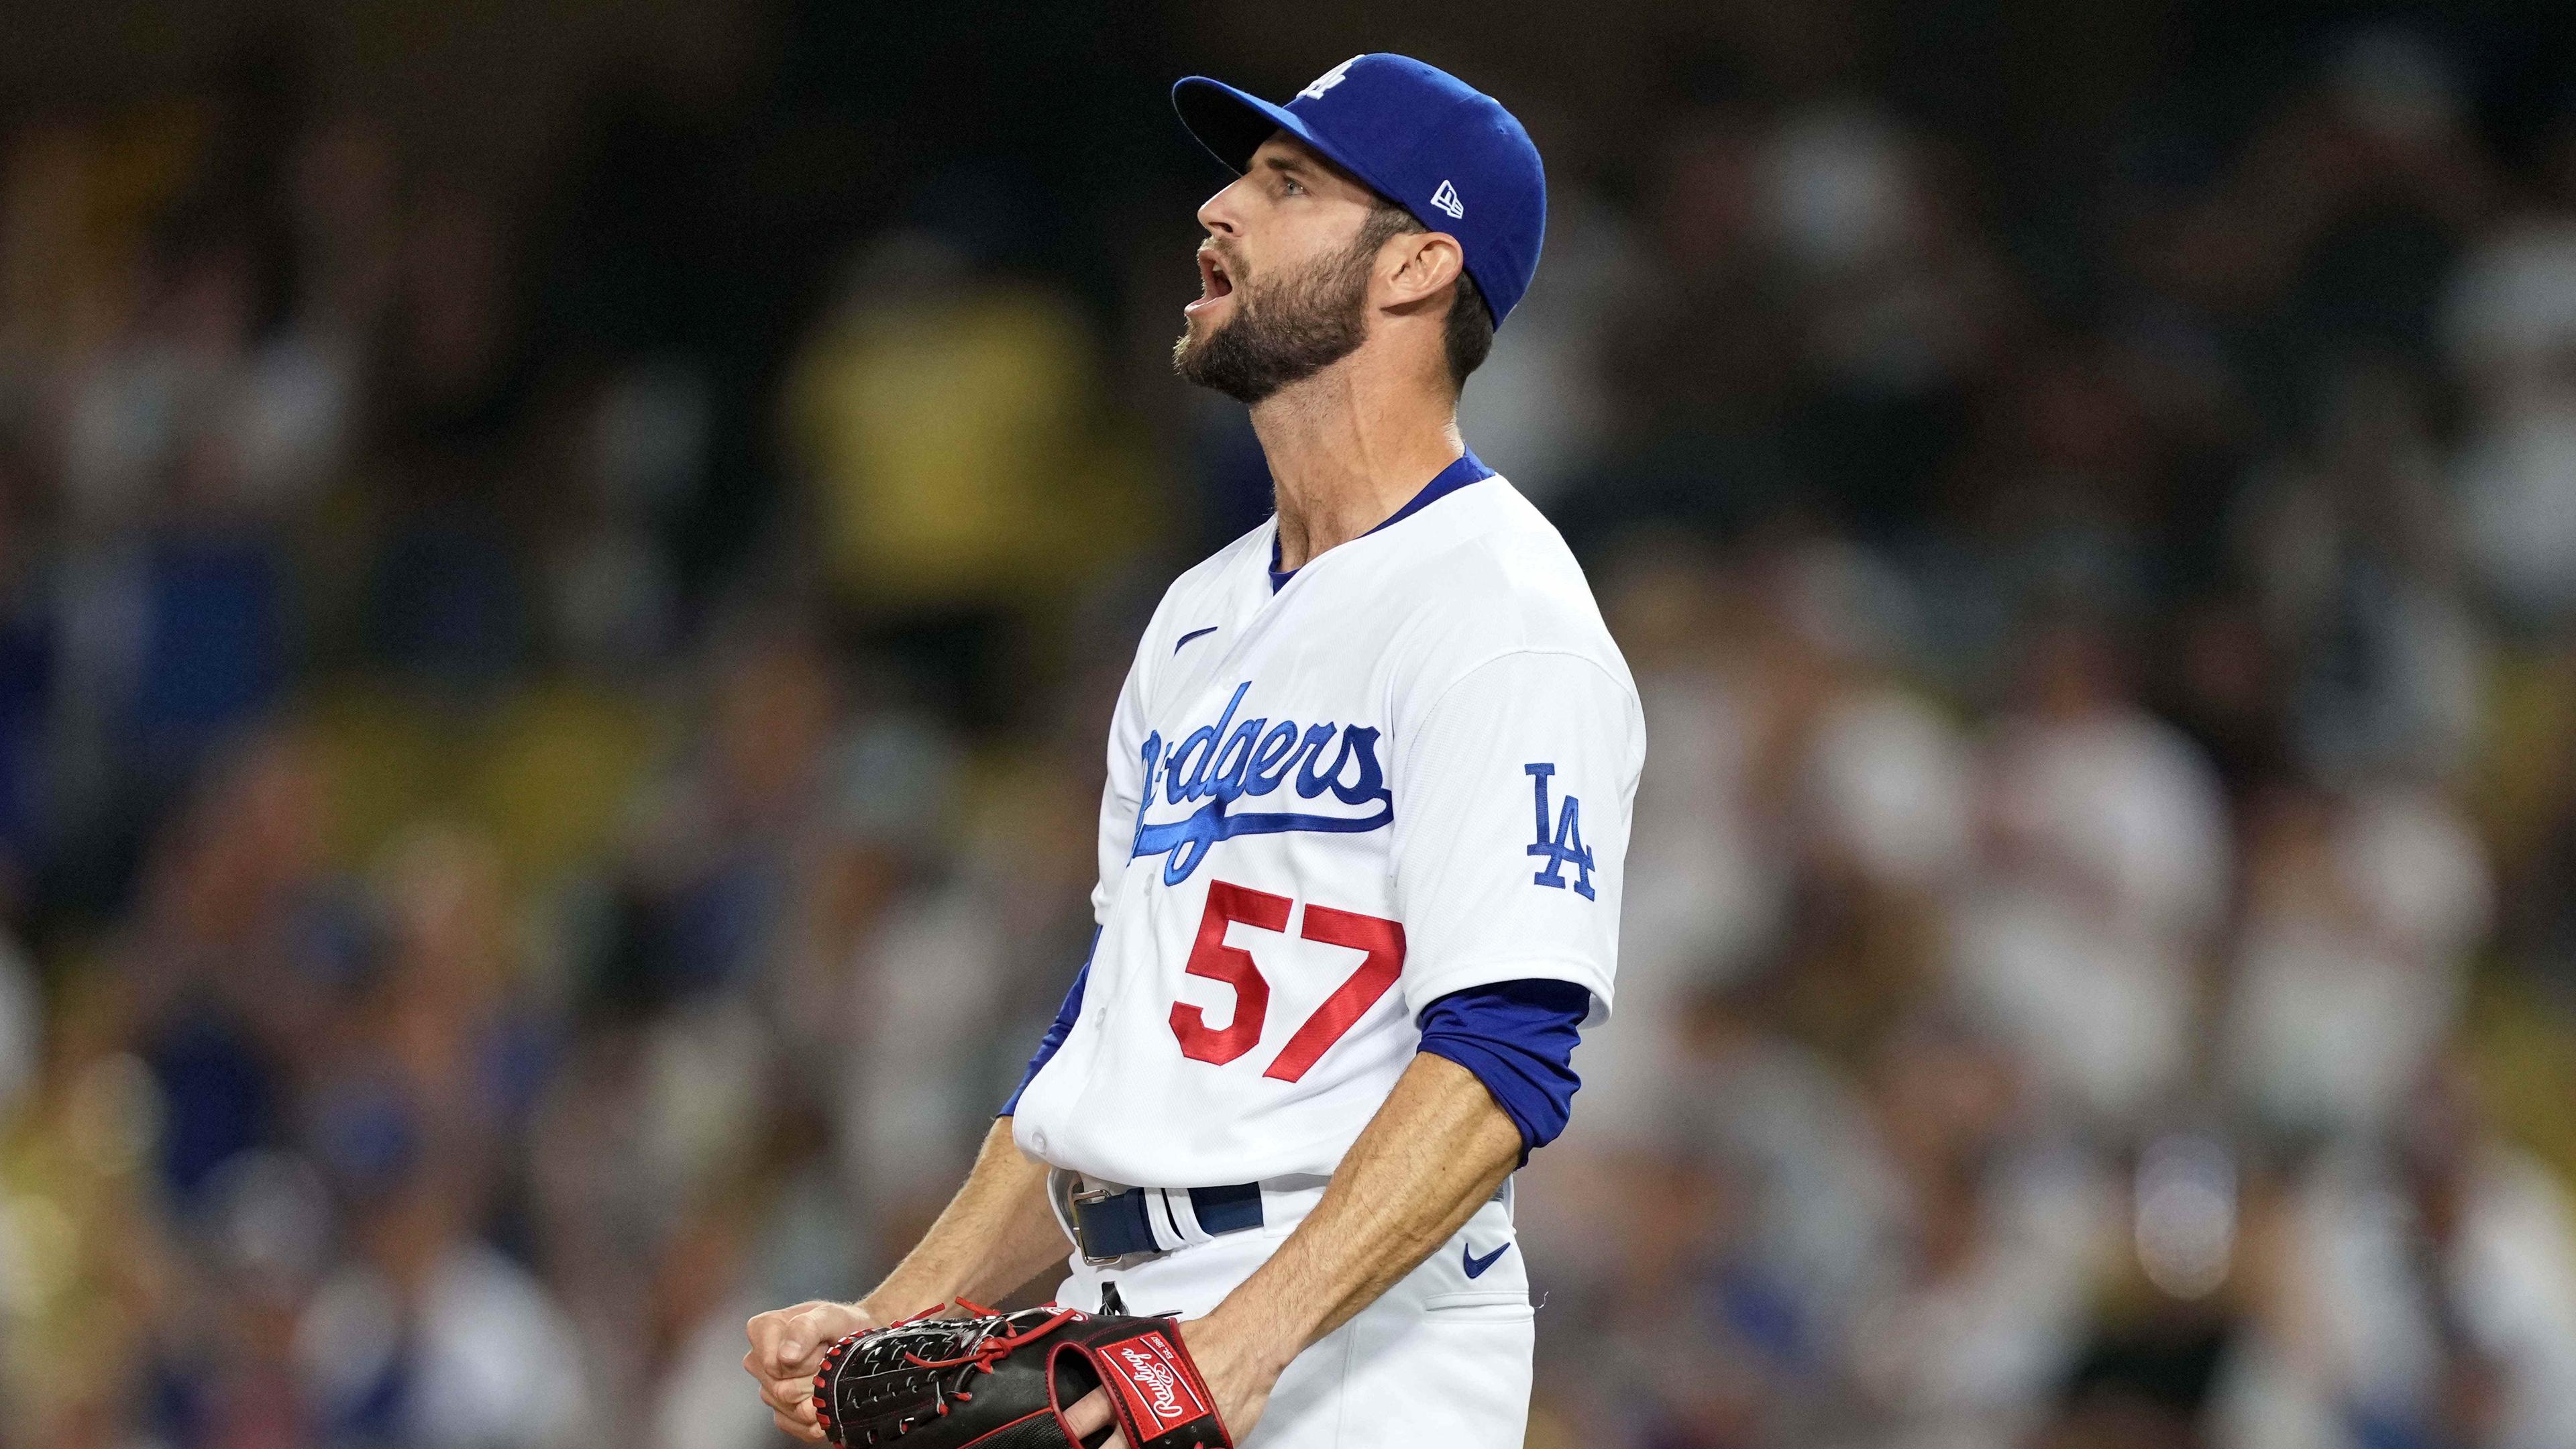 Jul 10, 2021; Los Angeles, California, USA; Los Angeles Dodgers relief pitcher Jake Reed (57) celebrates after defeating the Arizona Diamondback sat Dodger Stadium. / Kirby Lee-USA TODAY Sports